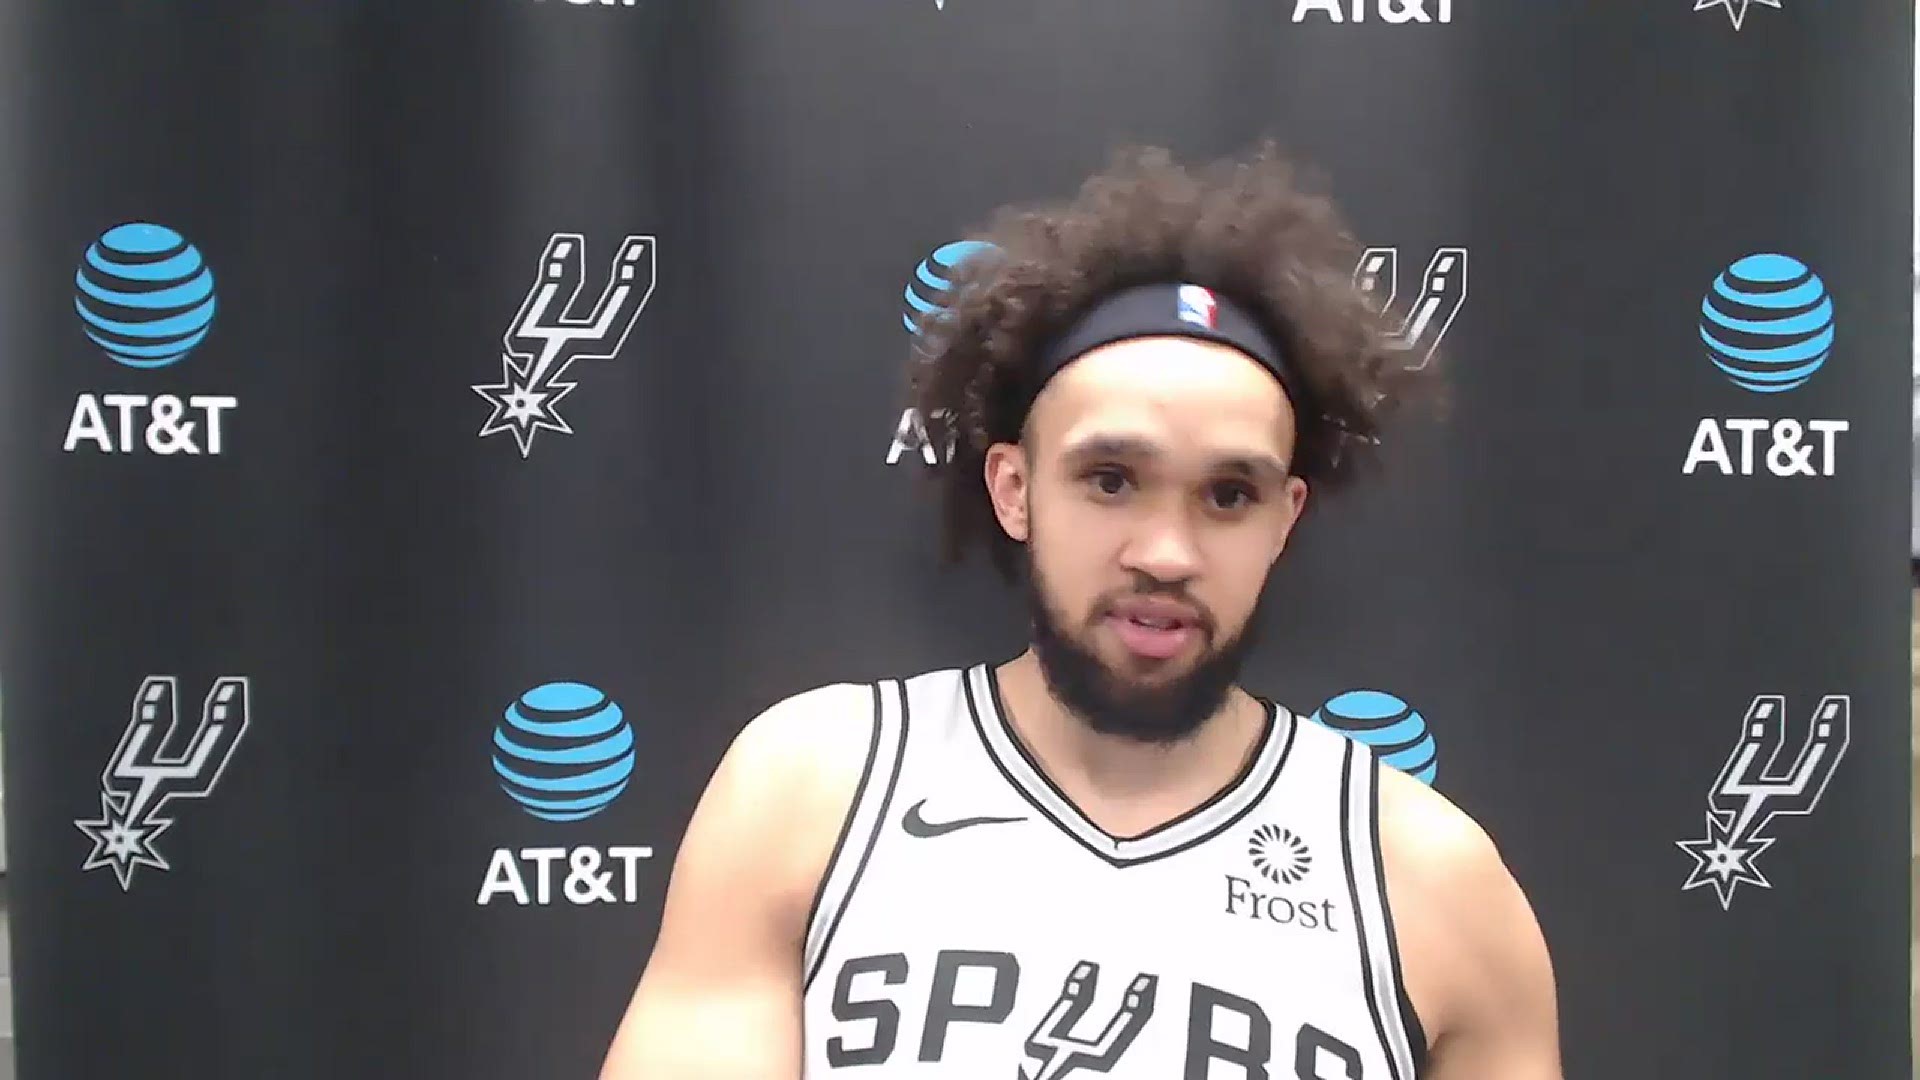 White spoke about getting back into the swing of things, starting with Dejounte Murray, and taking his first charge of the season to seal the game.